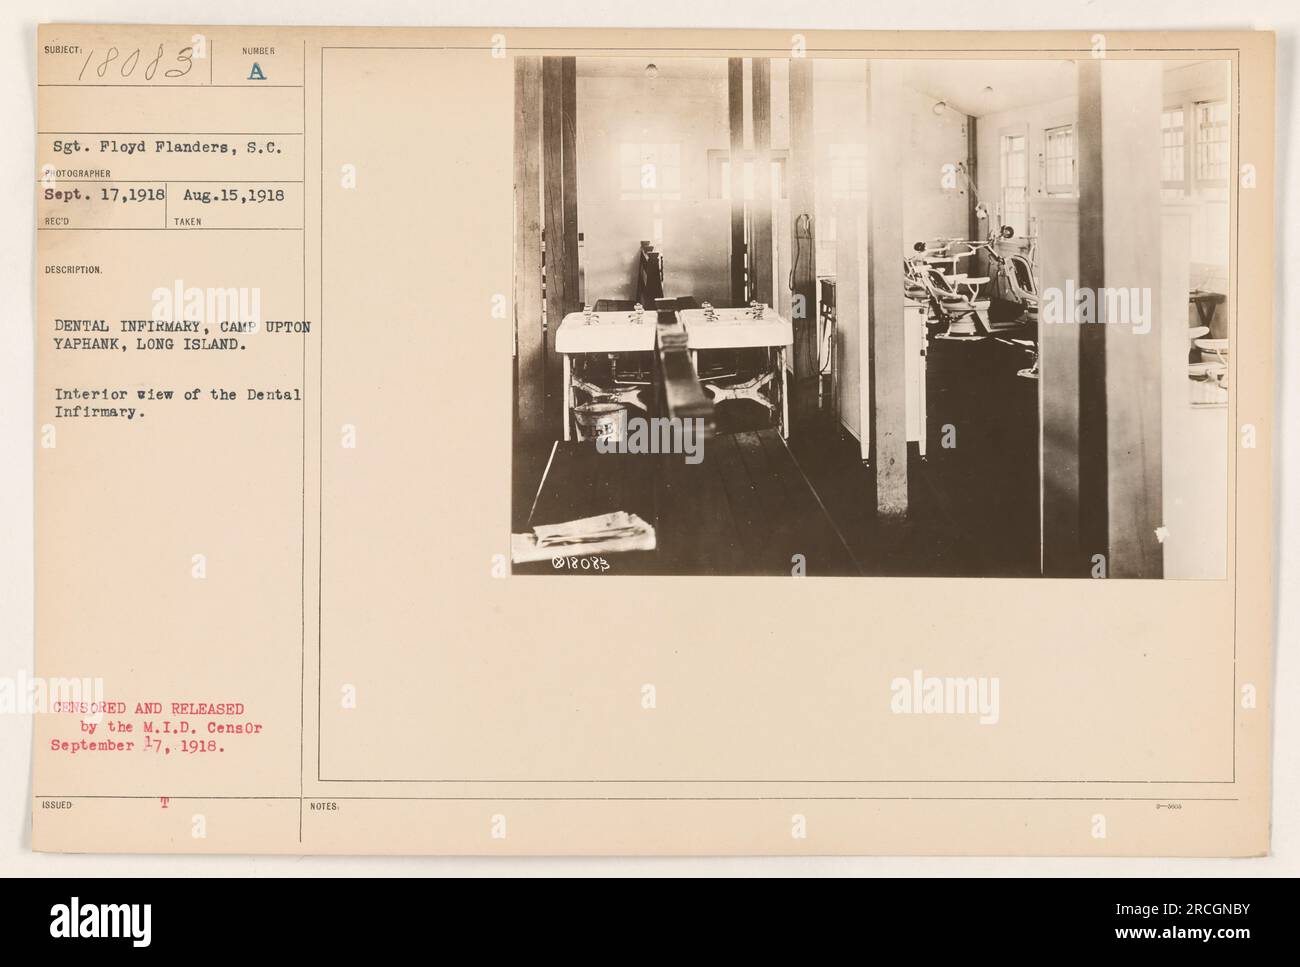 This photograph, taken on September 17, 1918, by Sgt. Floyd Flanders at Camp Upton Yaphank on Long Island, shows an interior view of the Dental Infirmary. It was censored and released by the M.I.D. censor. Stock Photo